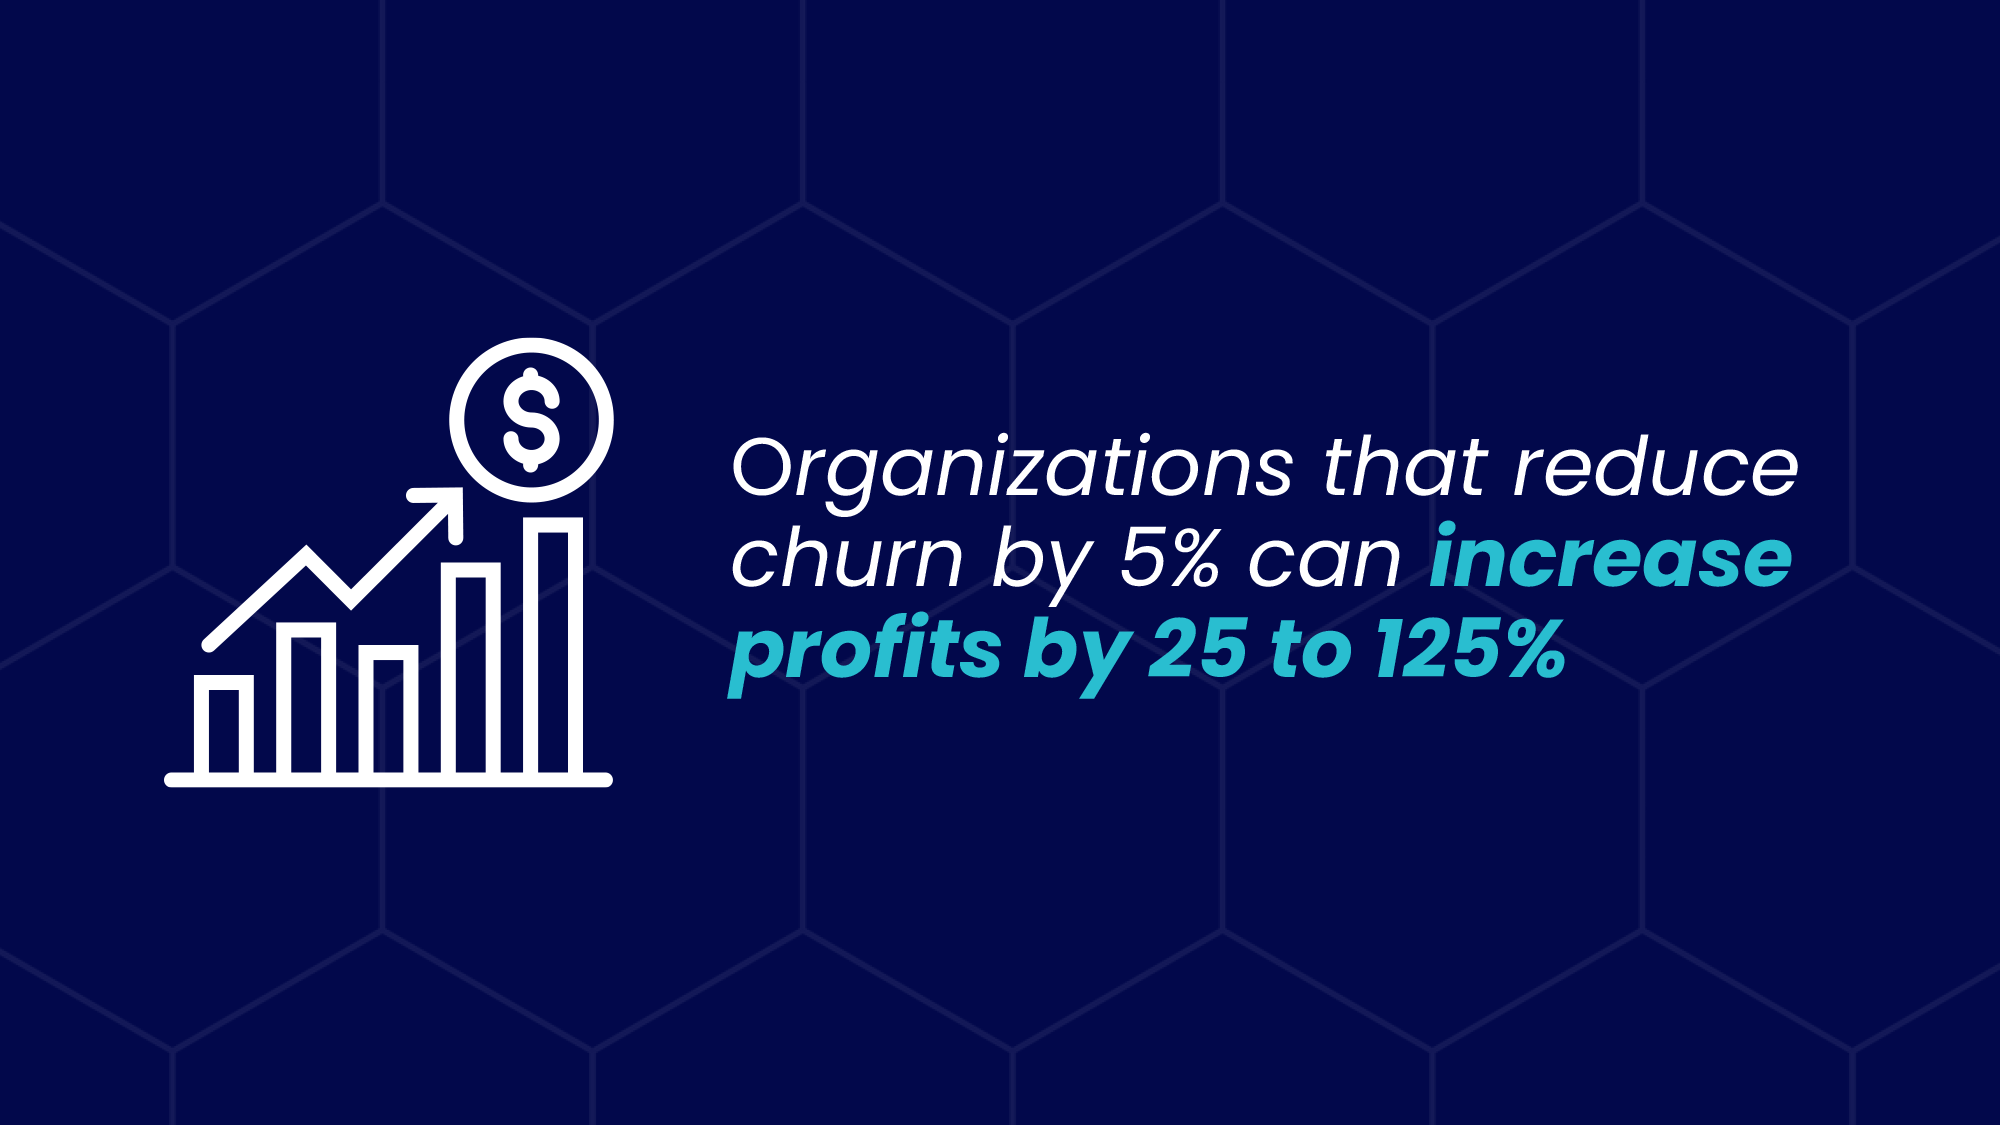 Organizations that reduce churn by 5% can increase profits by 25 to 125%